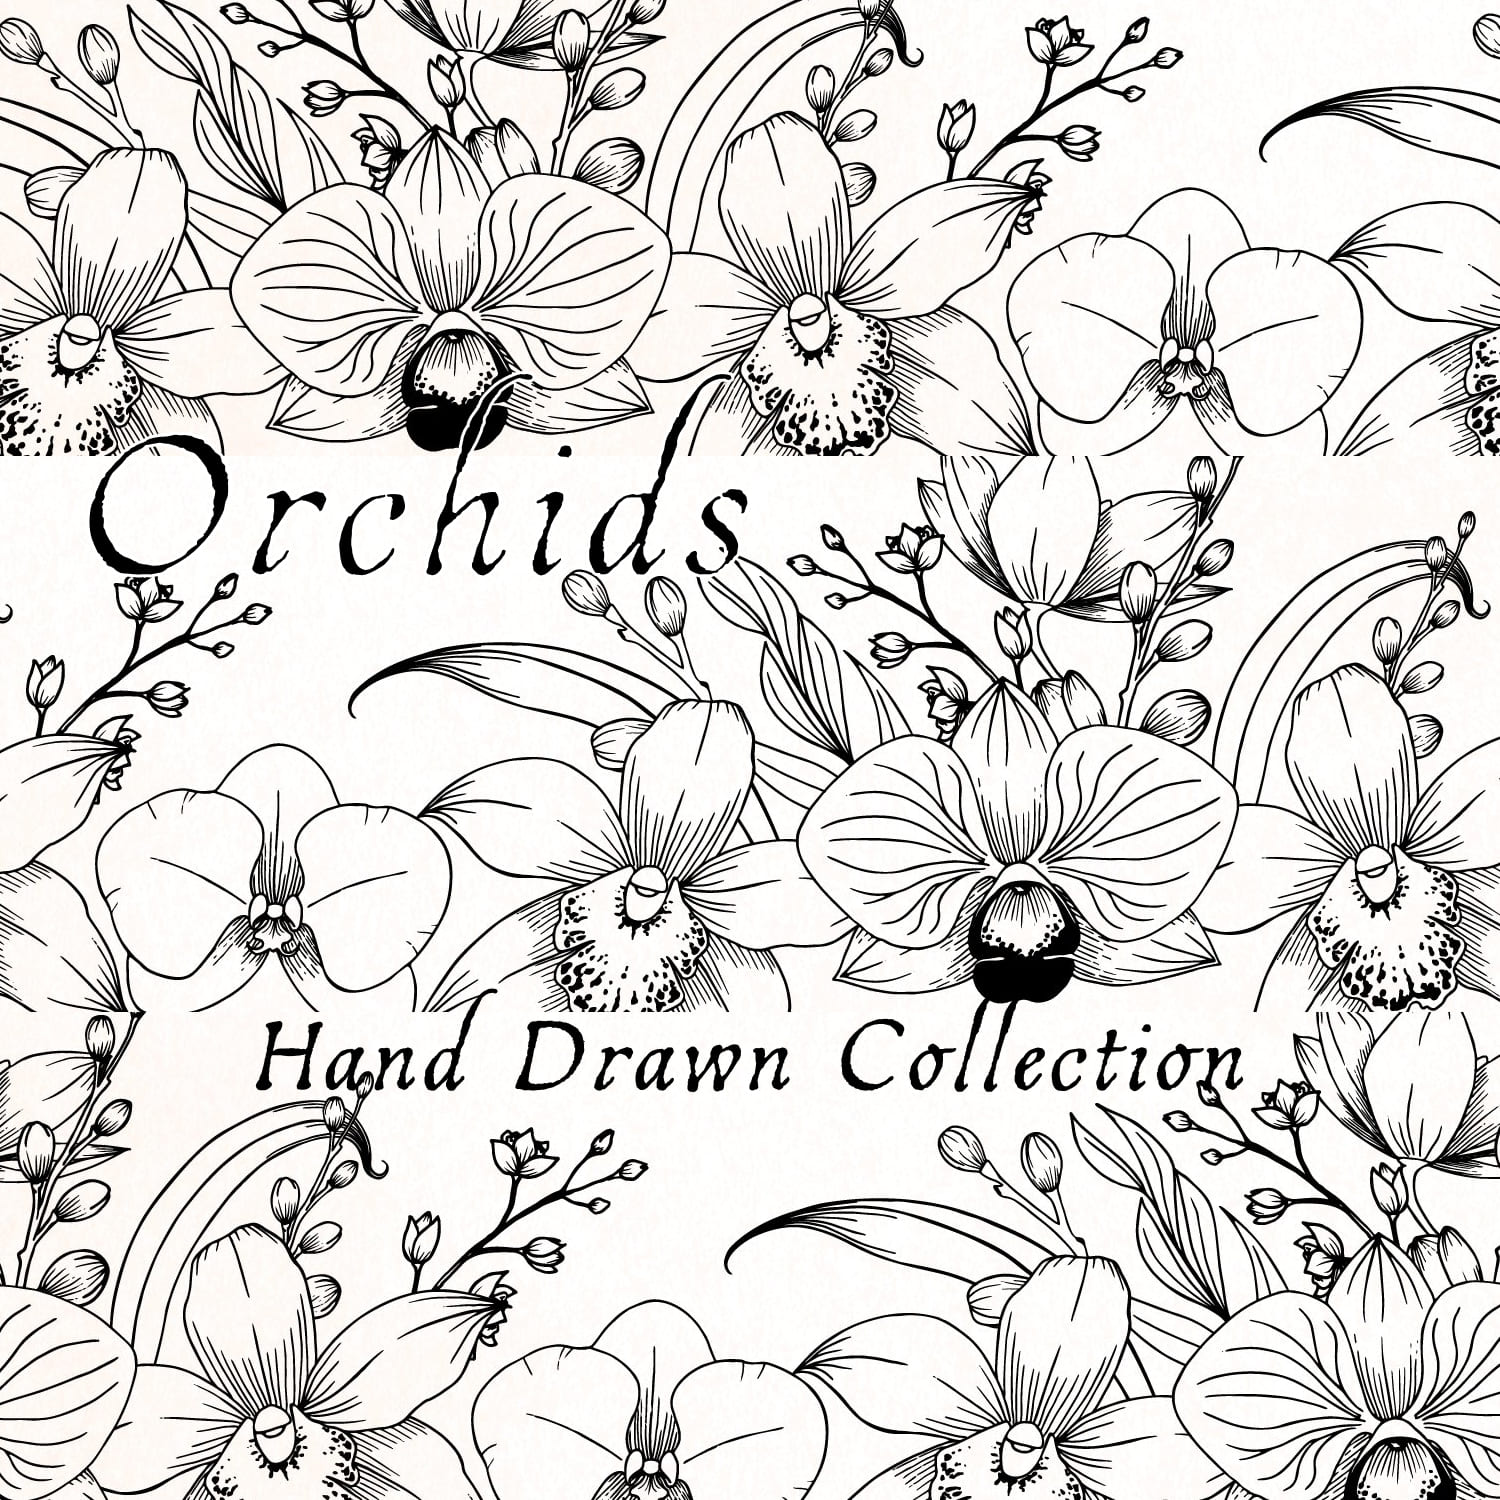 Hand draws delicate botanical orchids illustrations.